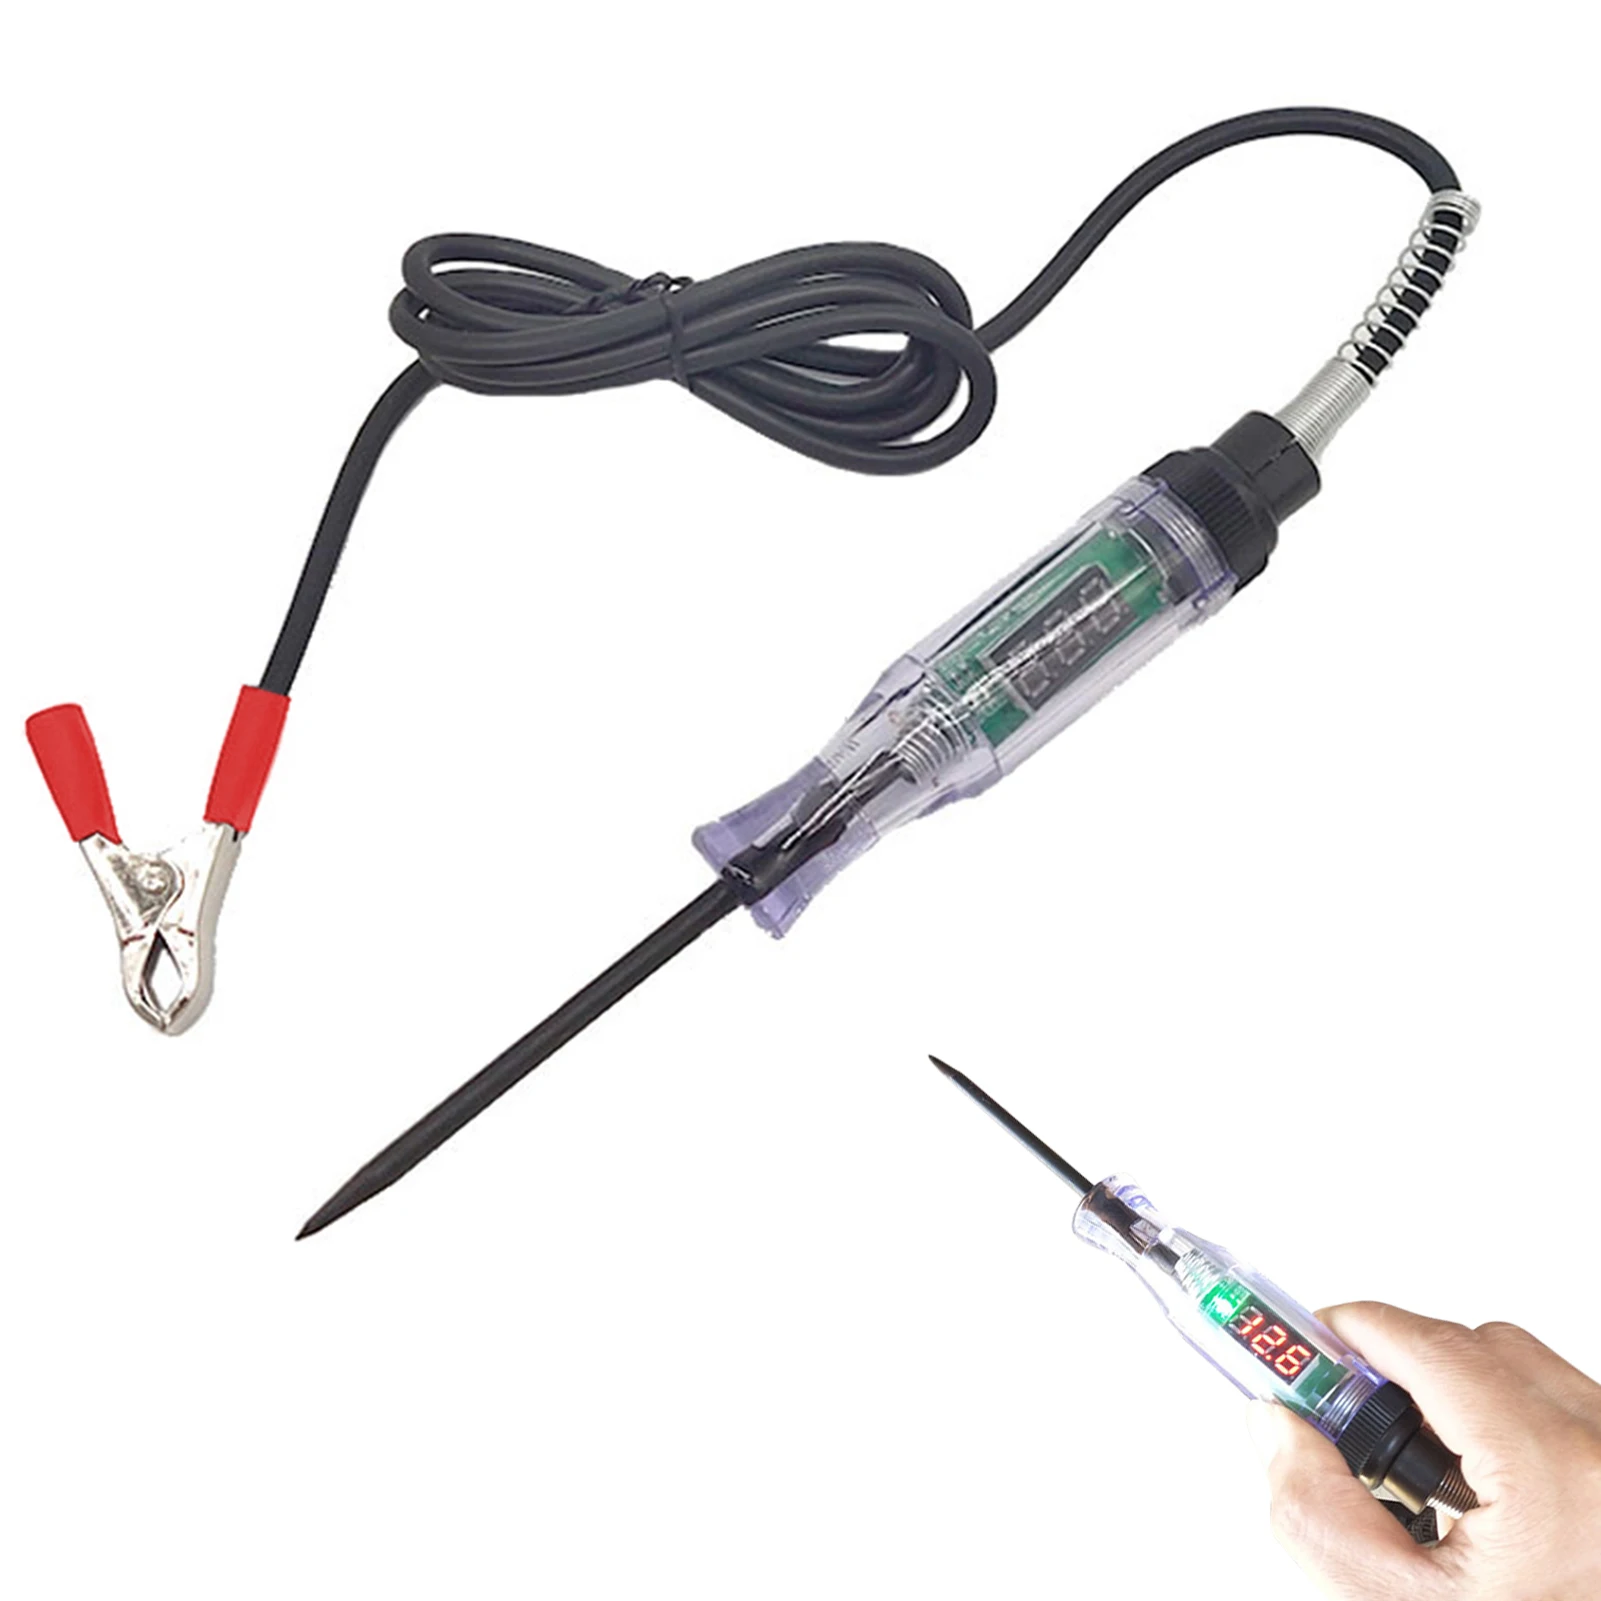 Backlit Digital LCD 3-48V Circuit Tester Car Truck Low Voltage & Automotive Test Light Tester Power Measuring Pen tonghui th9310 hipot tester insulation function resistance test ac dc withstanding voltage tester th9320 th9310b